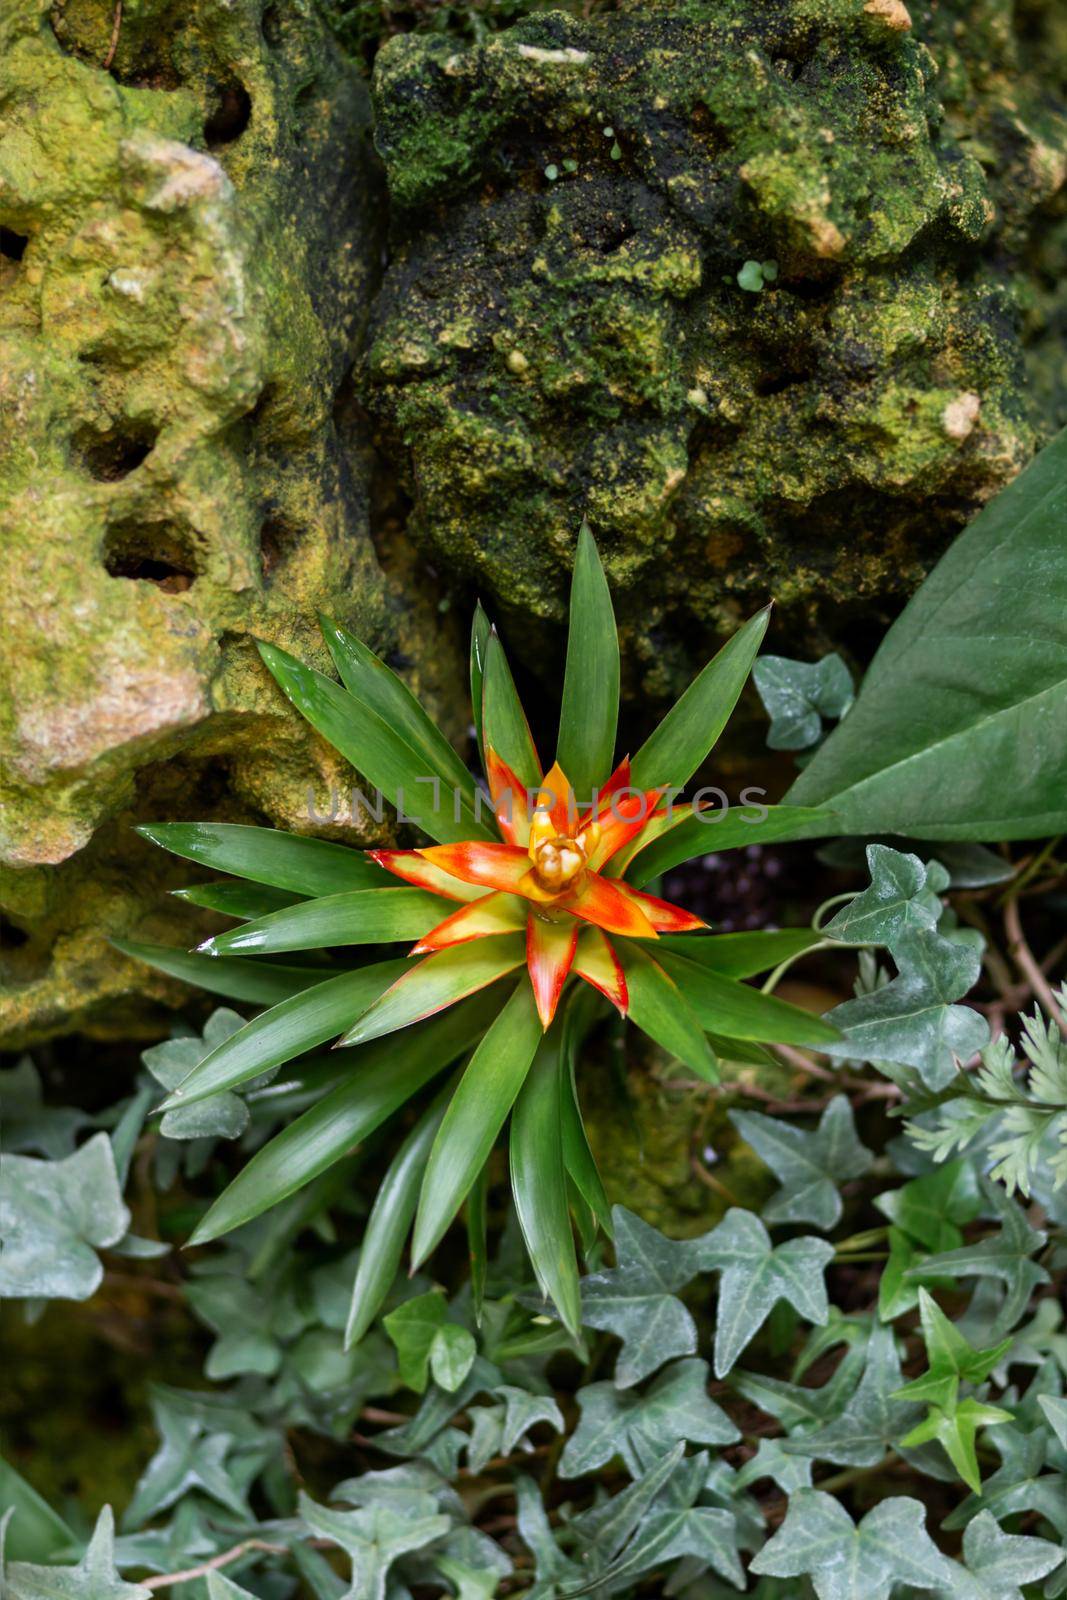 Guzmania or tufted airplant. Bright and colorful flower in bloom. by aksenovko